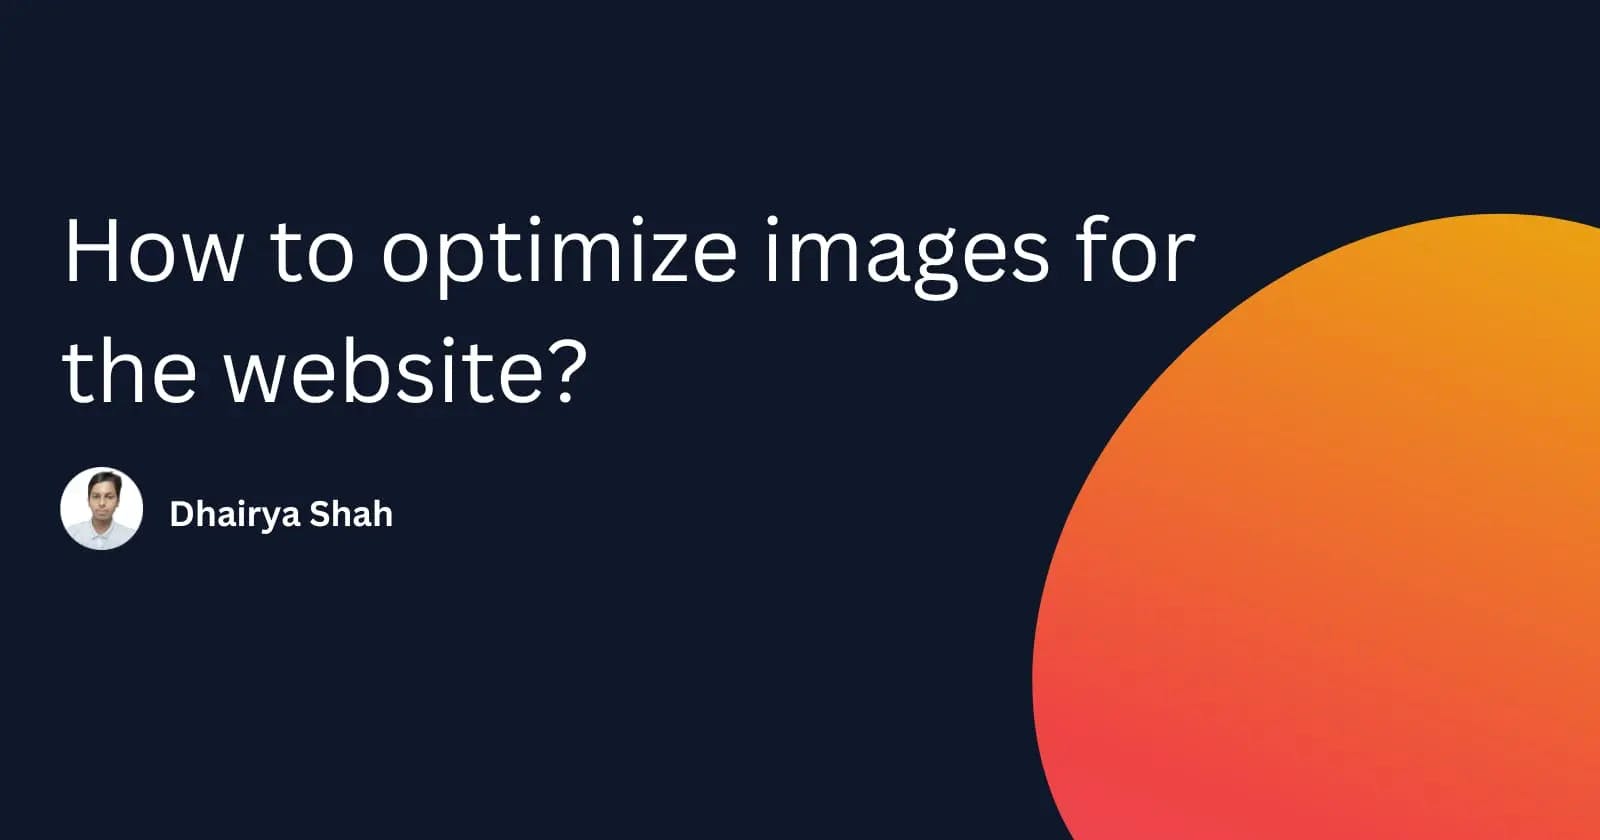 How to optimize images for website?